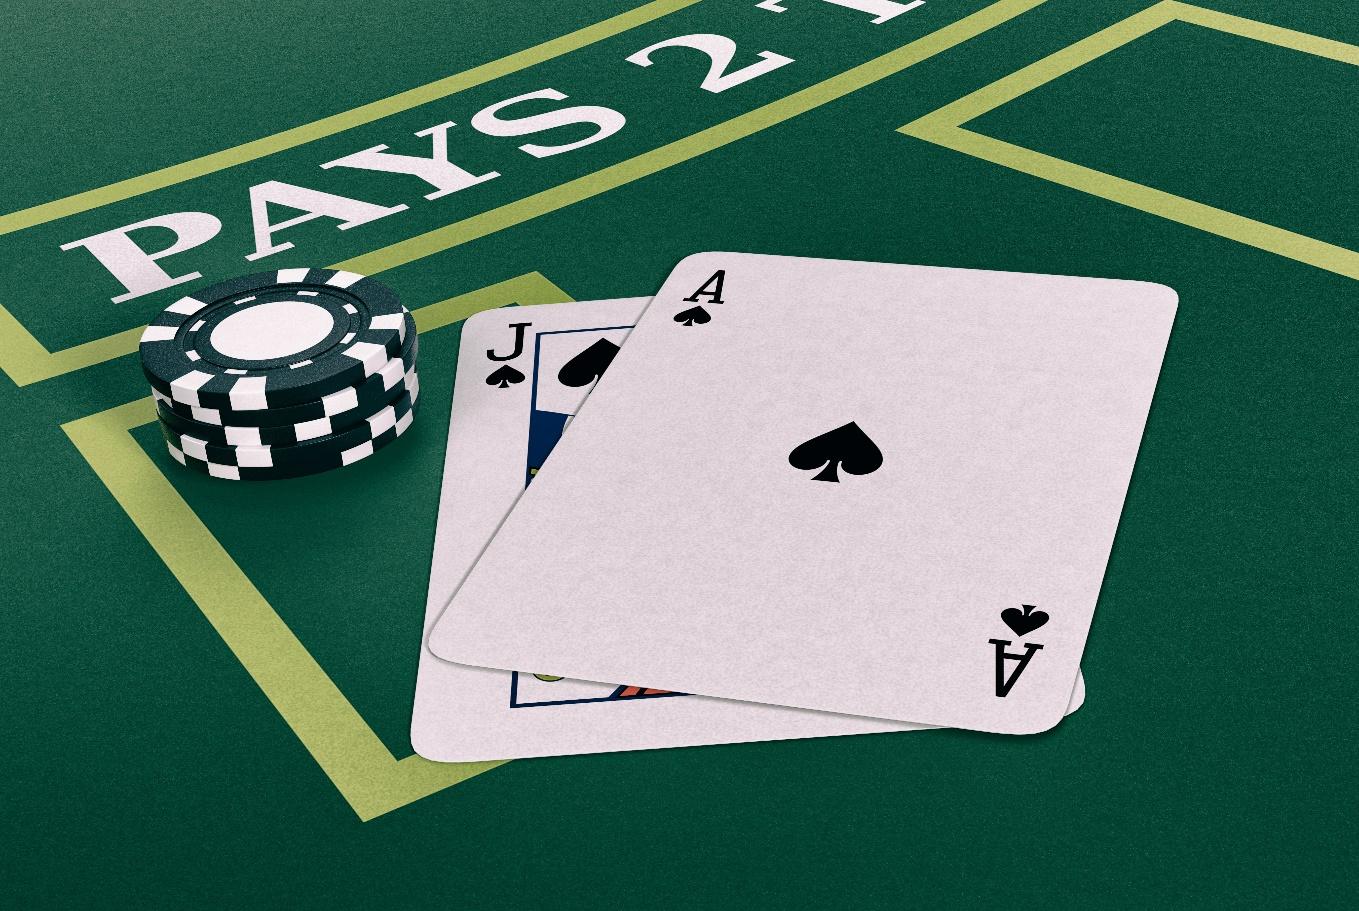 The best way to play Blackjack